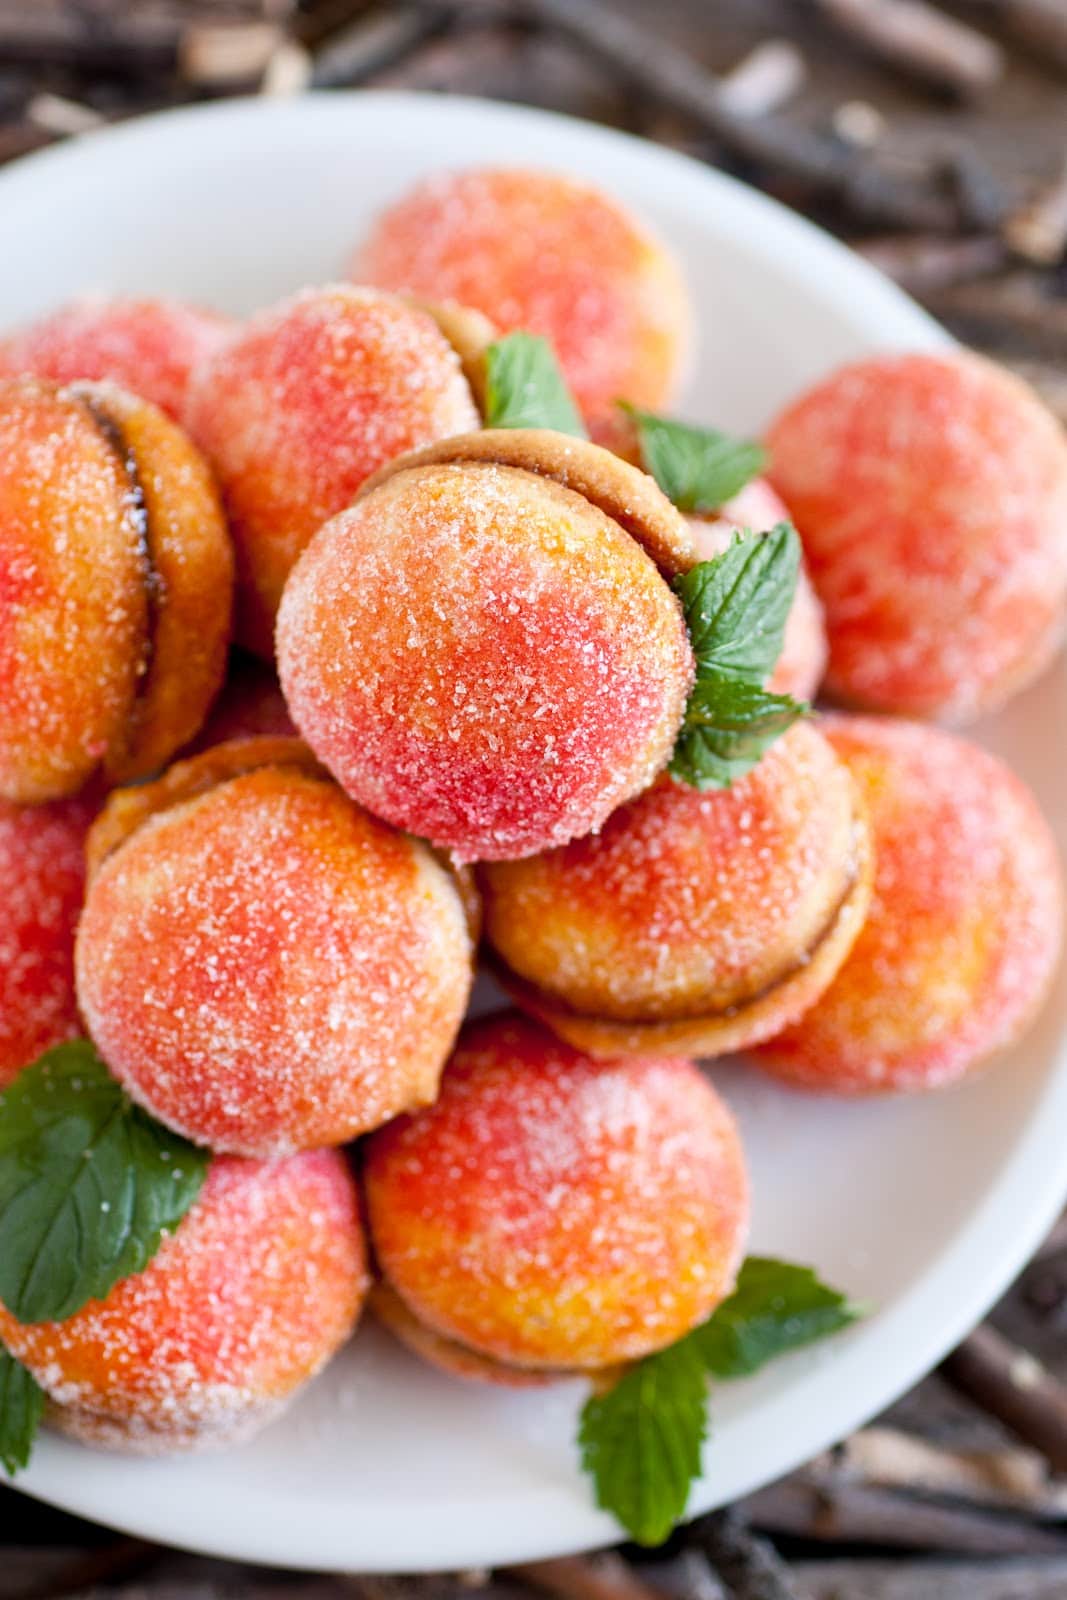 Peach Cookies That Look Like a Real Peach! - Cooking Classy